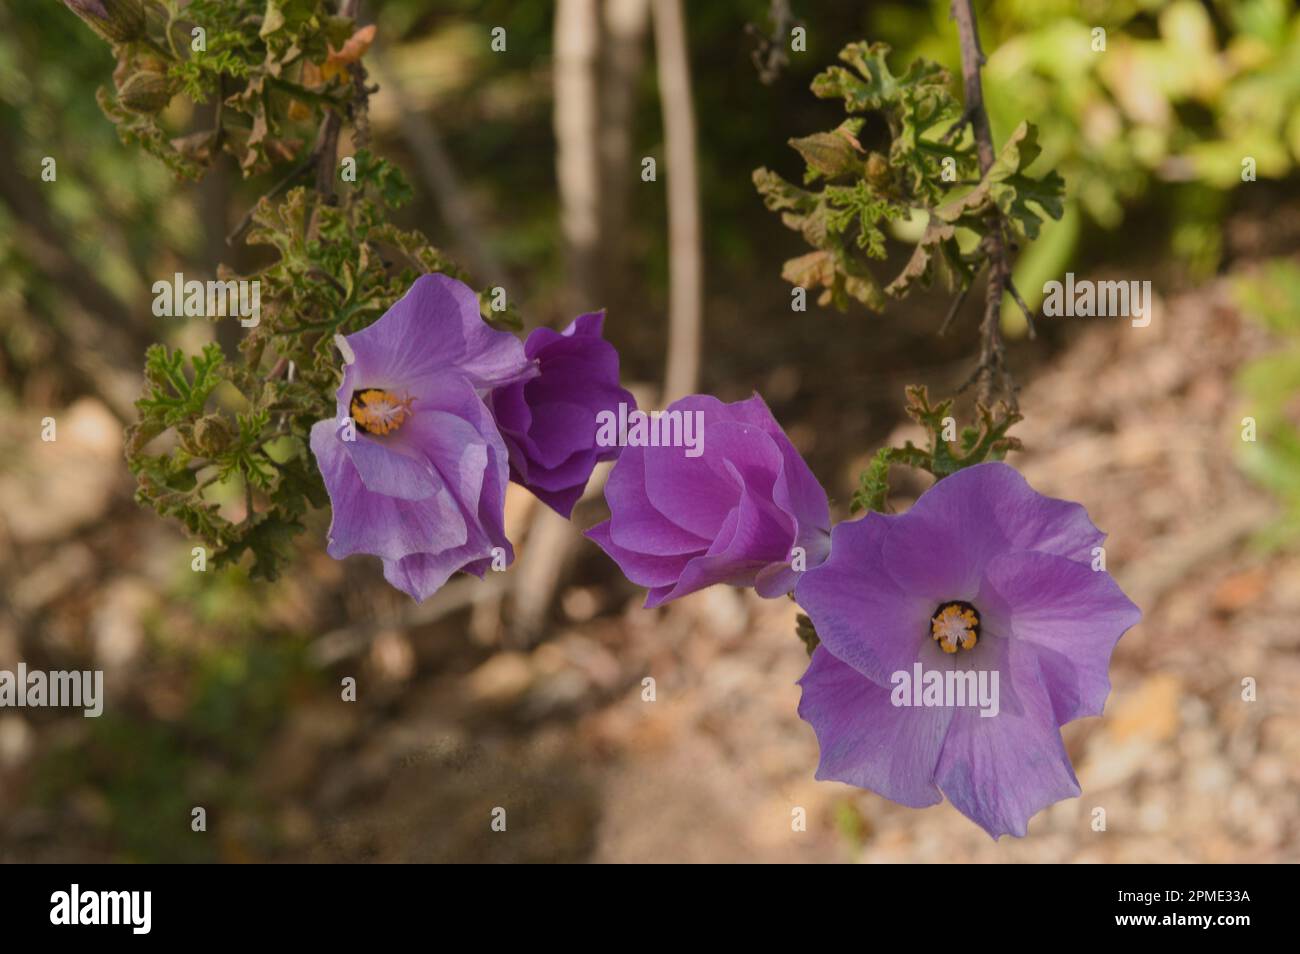 Periwinkles shining beauty,. color & life in the colorful spring garden, Stock Photo